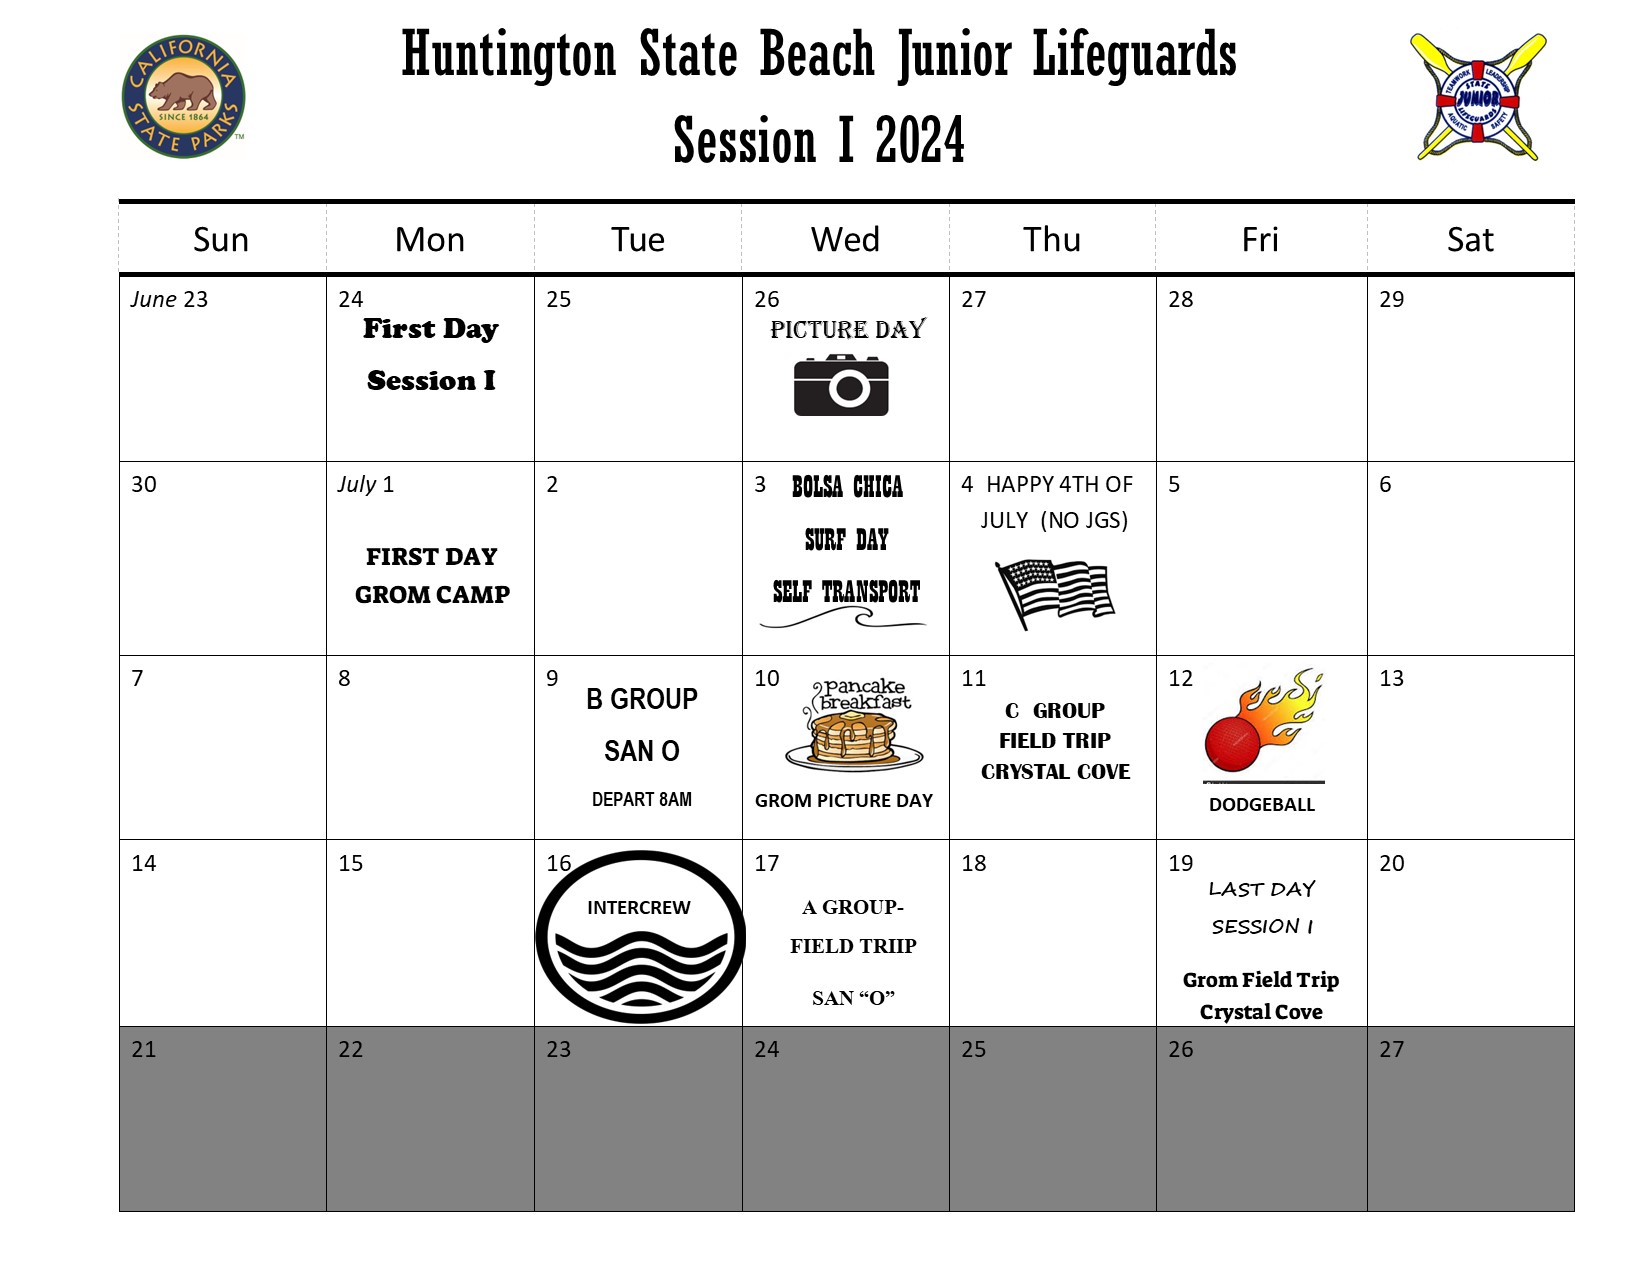 Huntington State Beach Junior Lifeguards Session I 2024 Calendar. The California state parks logo and California State Junior Lifeguard program logos on the top. Monday June 23rd first day session. June 26 Picture Day. July 1 First Day Grom Camp. July 3 Bolsa Chica Surf Day Self Transport. July 4 Happy 4th of July (no JGs). July 9 B Group San O Depart 8am. July 10 Pancake Breakfast Grom picture day. July 11 C Group Field Trip Crystal Cove. July 12 Dodgeball. July 16 Intercrew. July 17 A Group Field Trip San O. July 19 Last Day Session I Grom Field Trip Crystal Cove. Week of July 21 - 27 is greyed out.